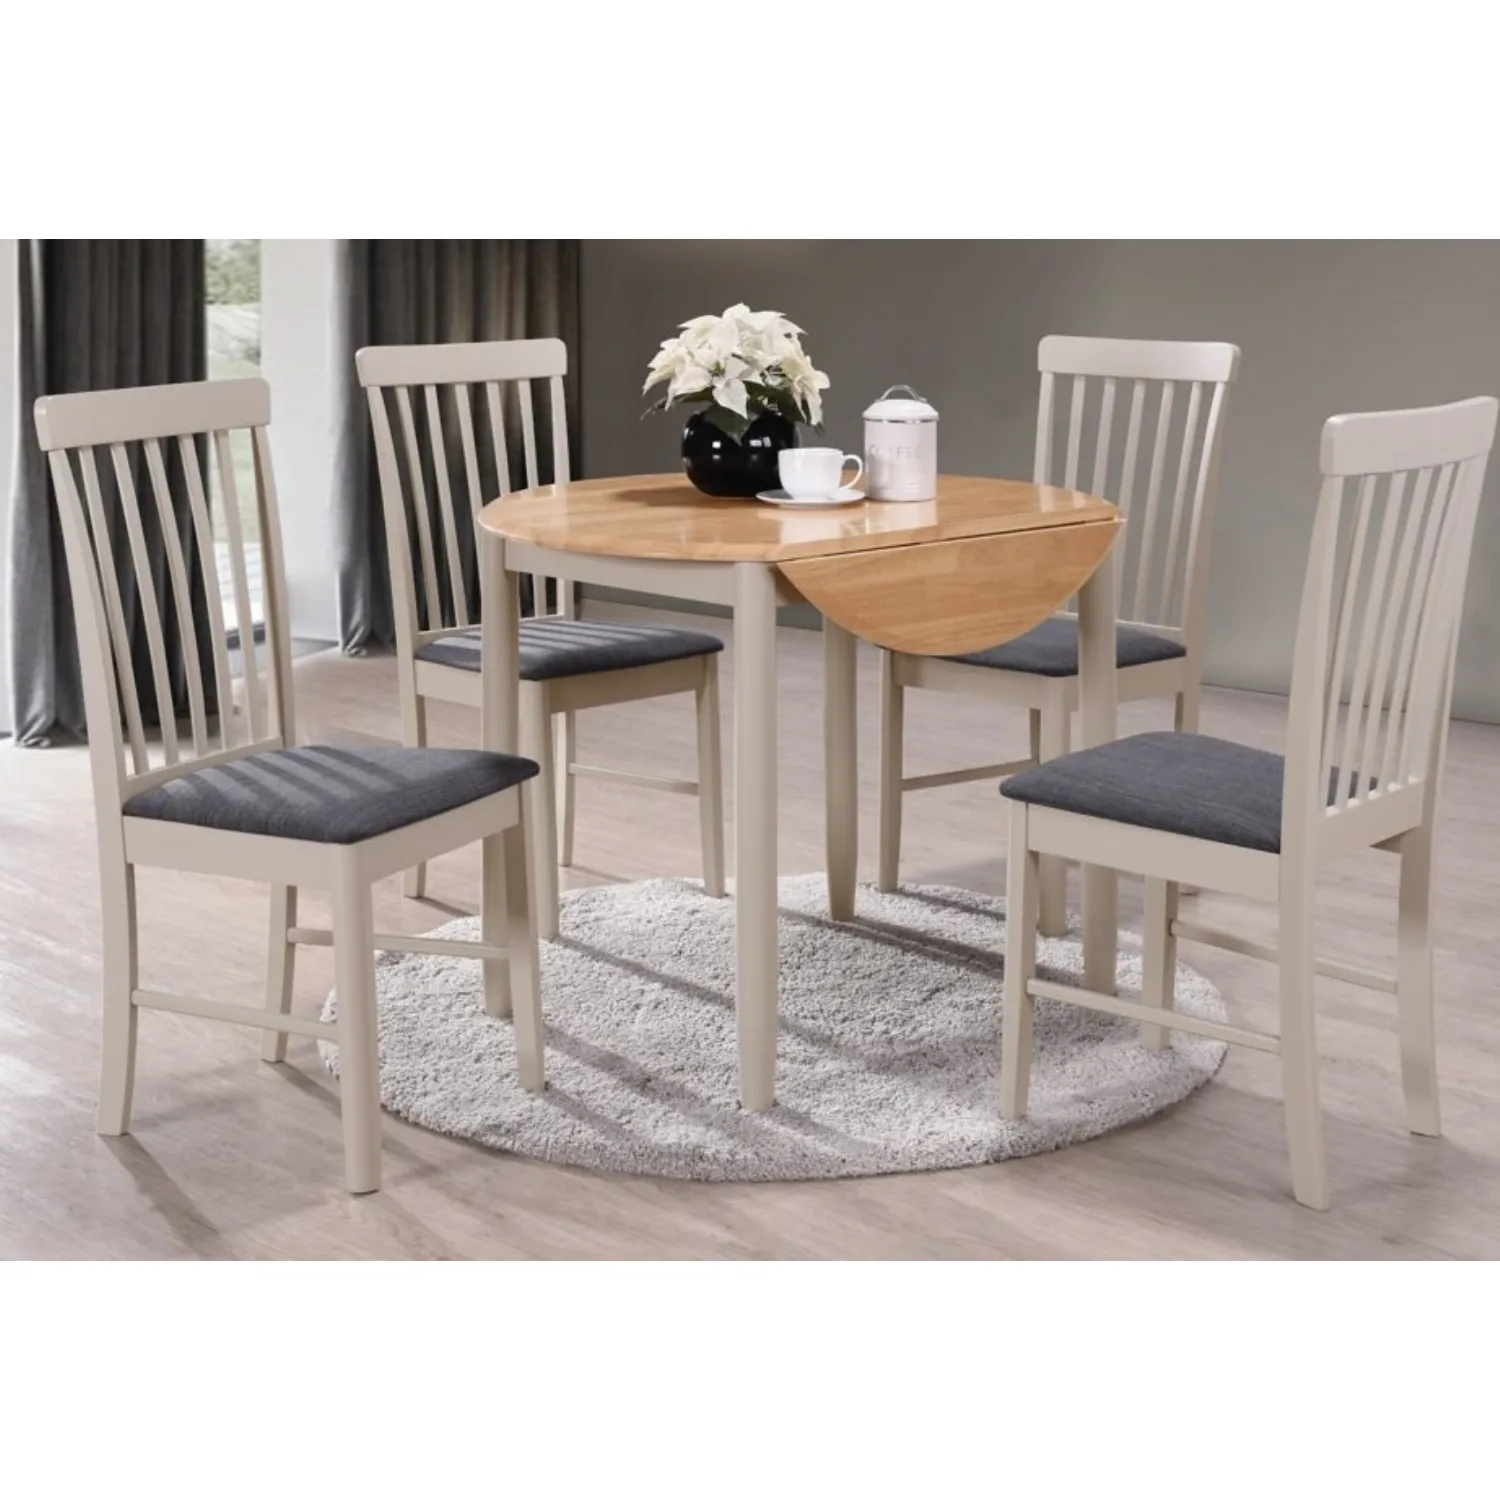 Light Oak and Grey Painted Drop Edge Round Table and 4 Chairs